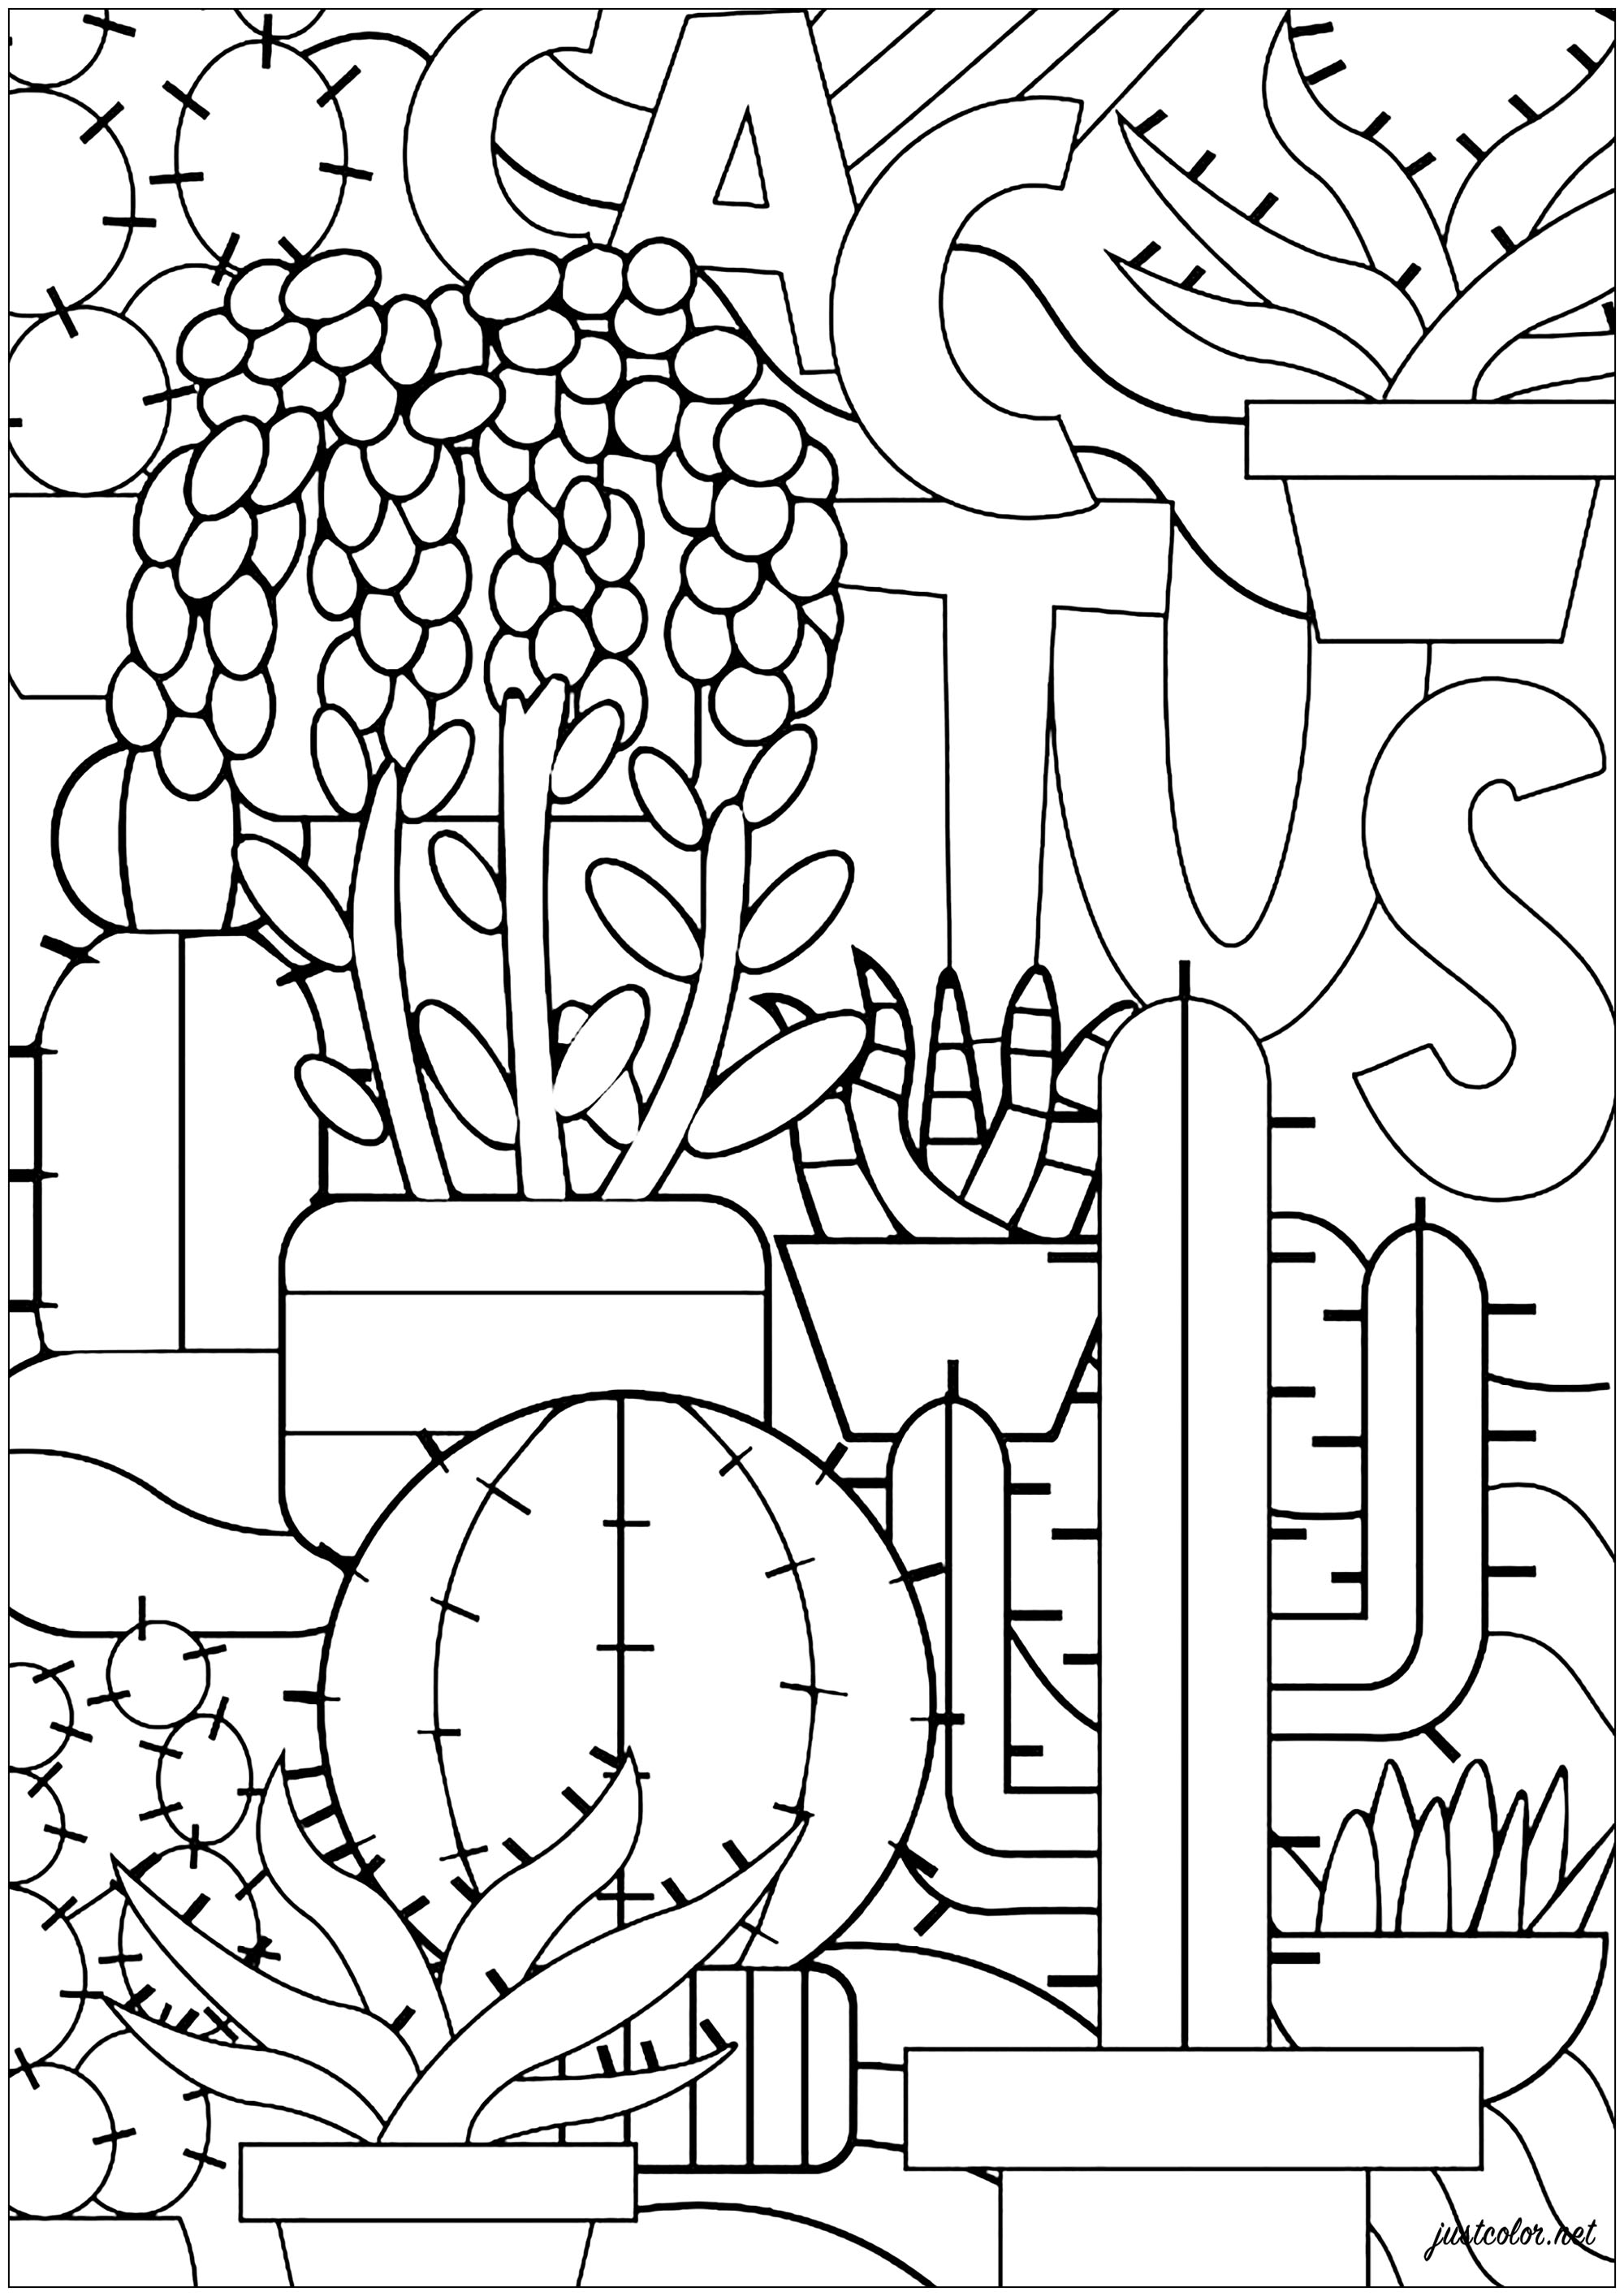 Various varieties of cacti to be colored, Artist : Théo D